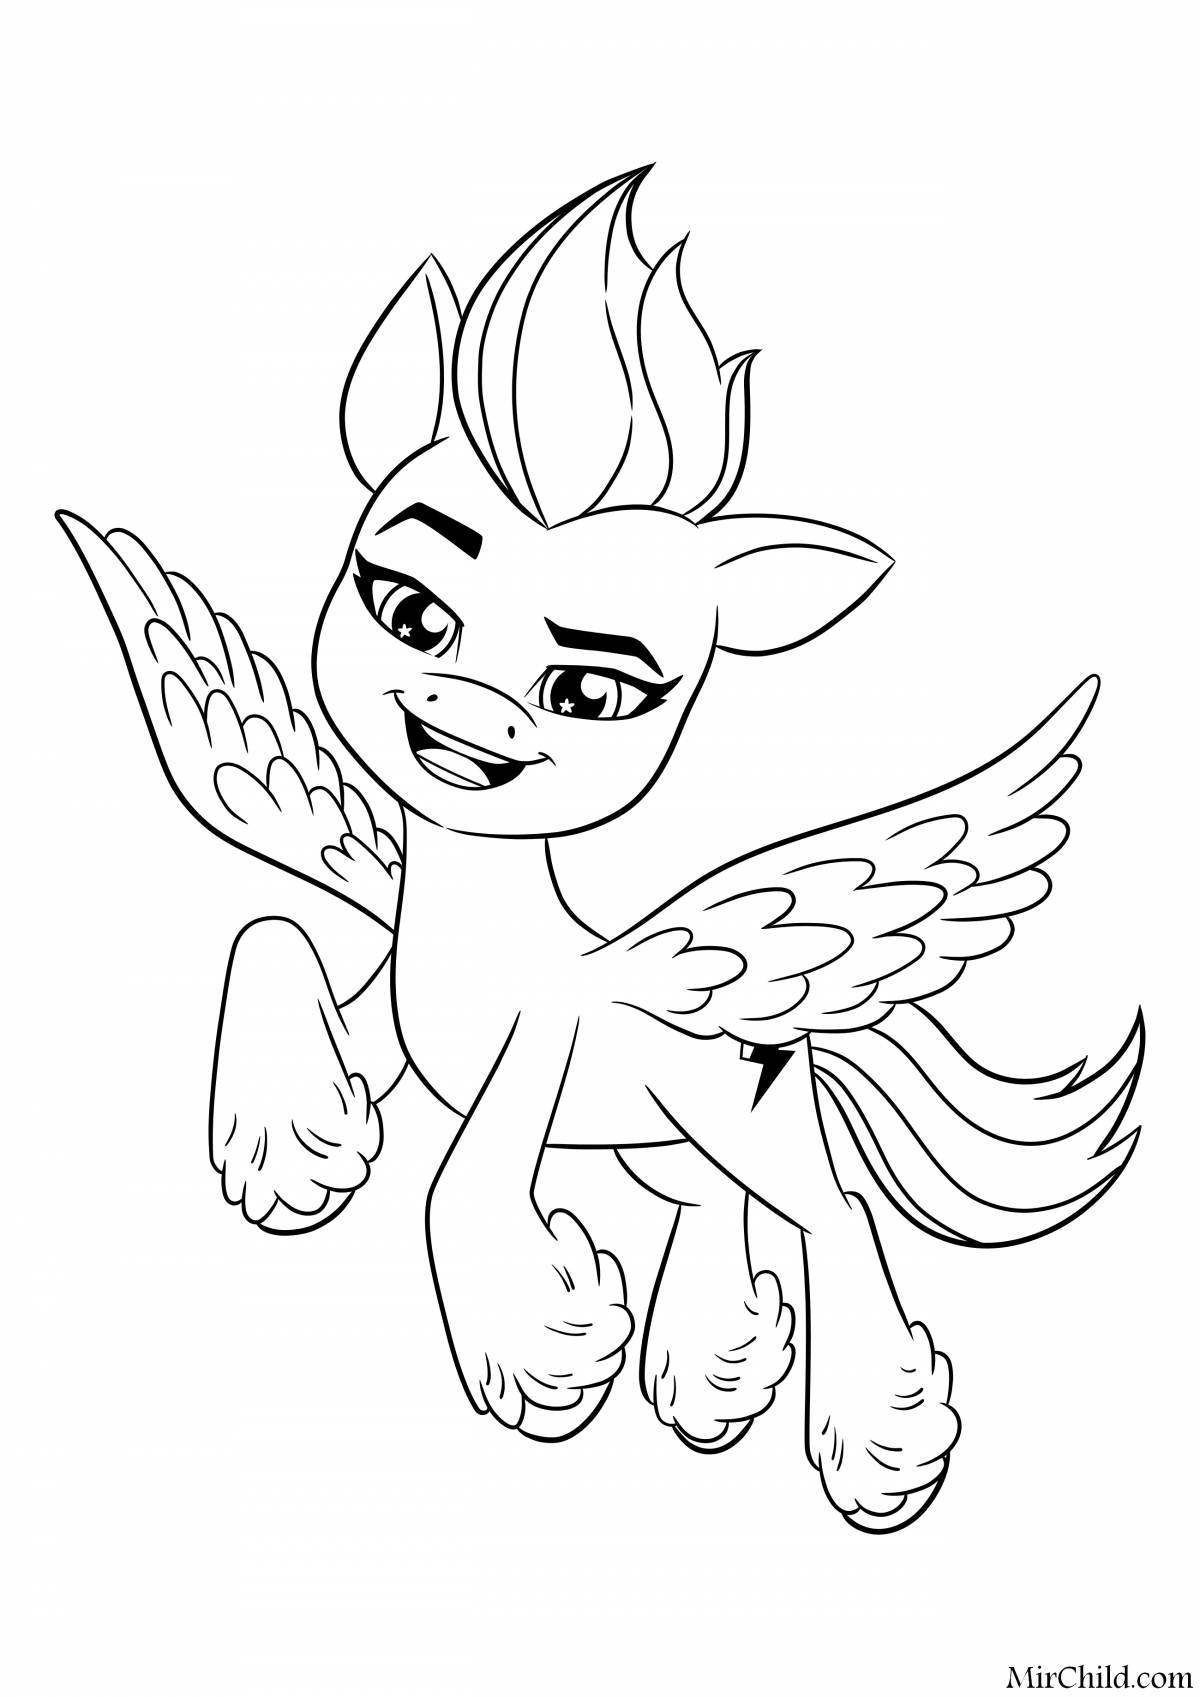 Colorful new generation pony coloring page